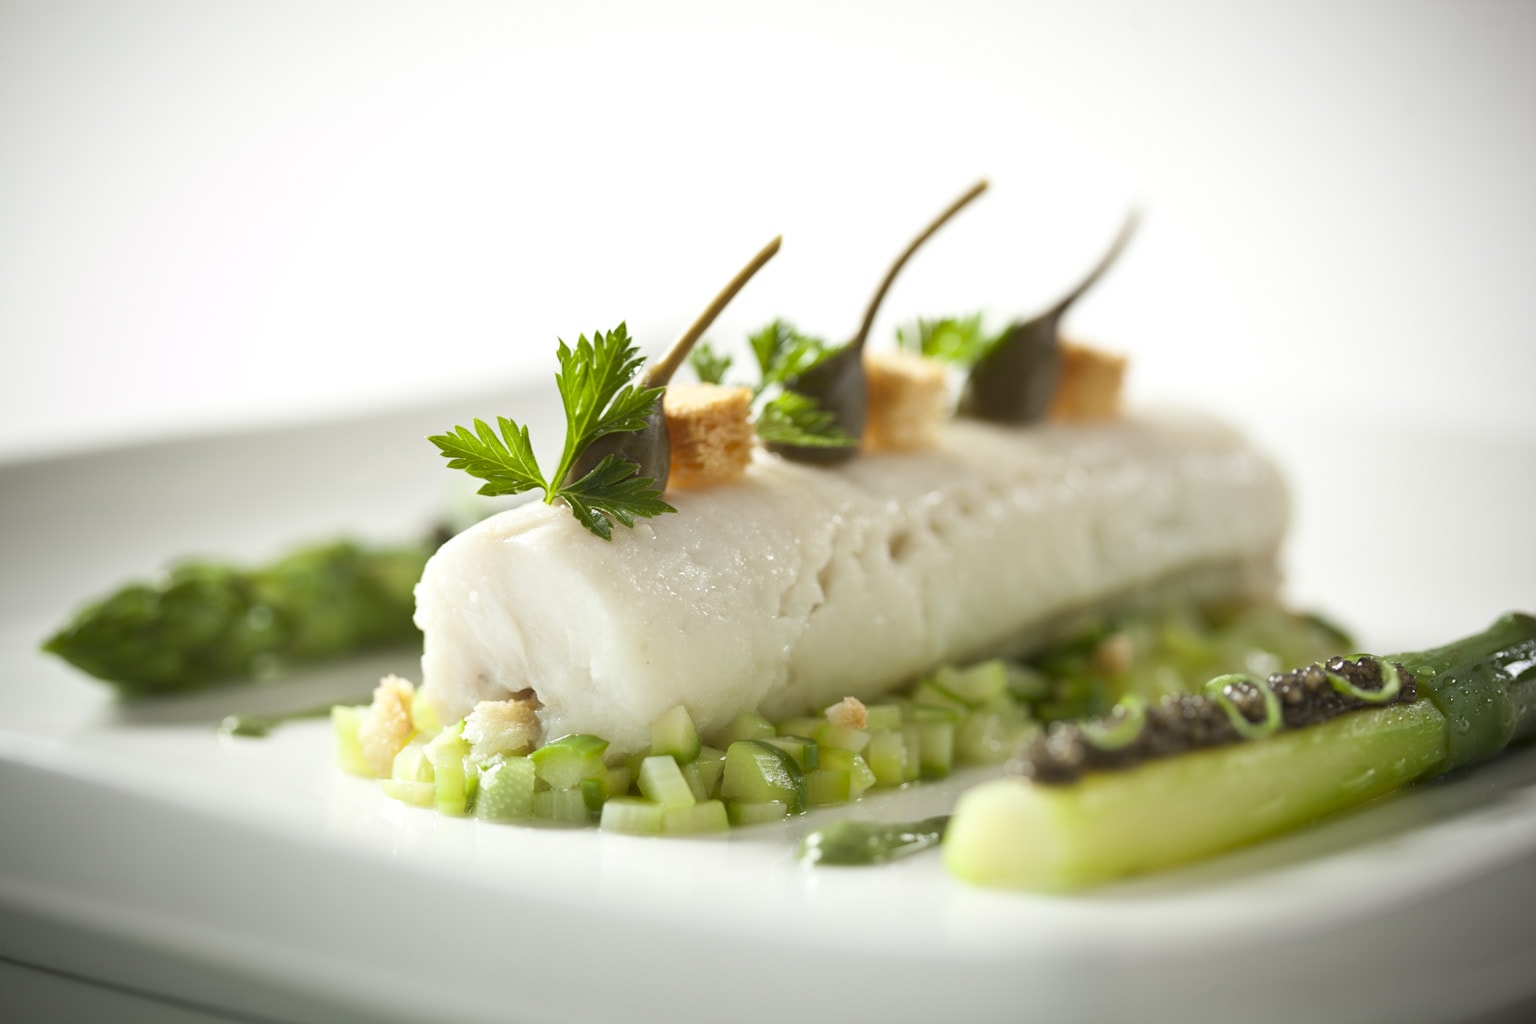 Turbot with Green Asparagus, Caper Berries and American Sturgeon Caviar